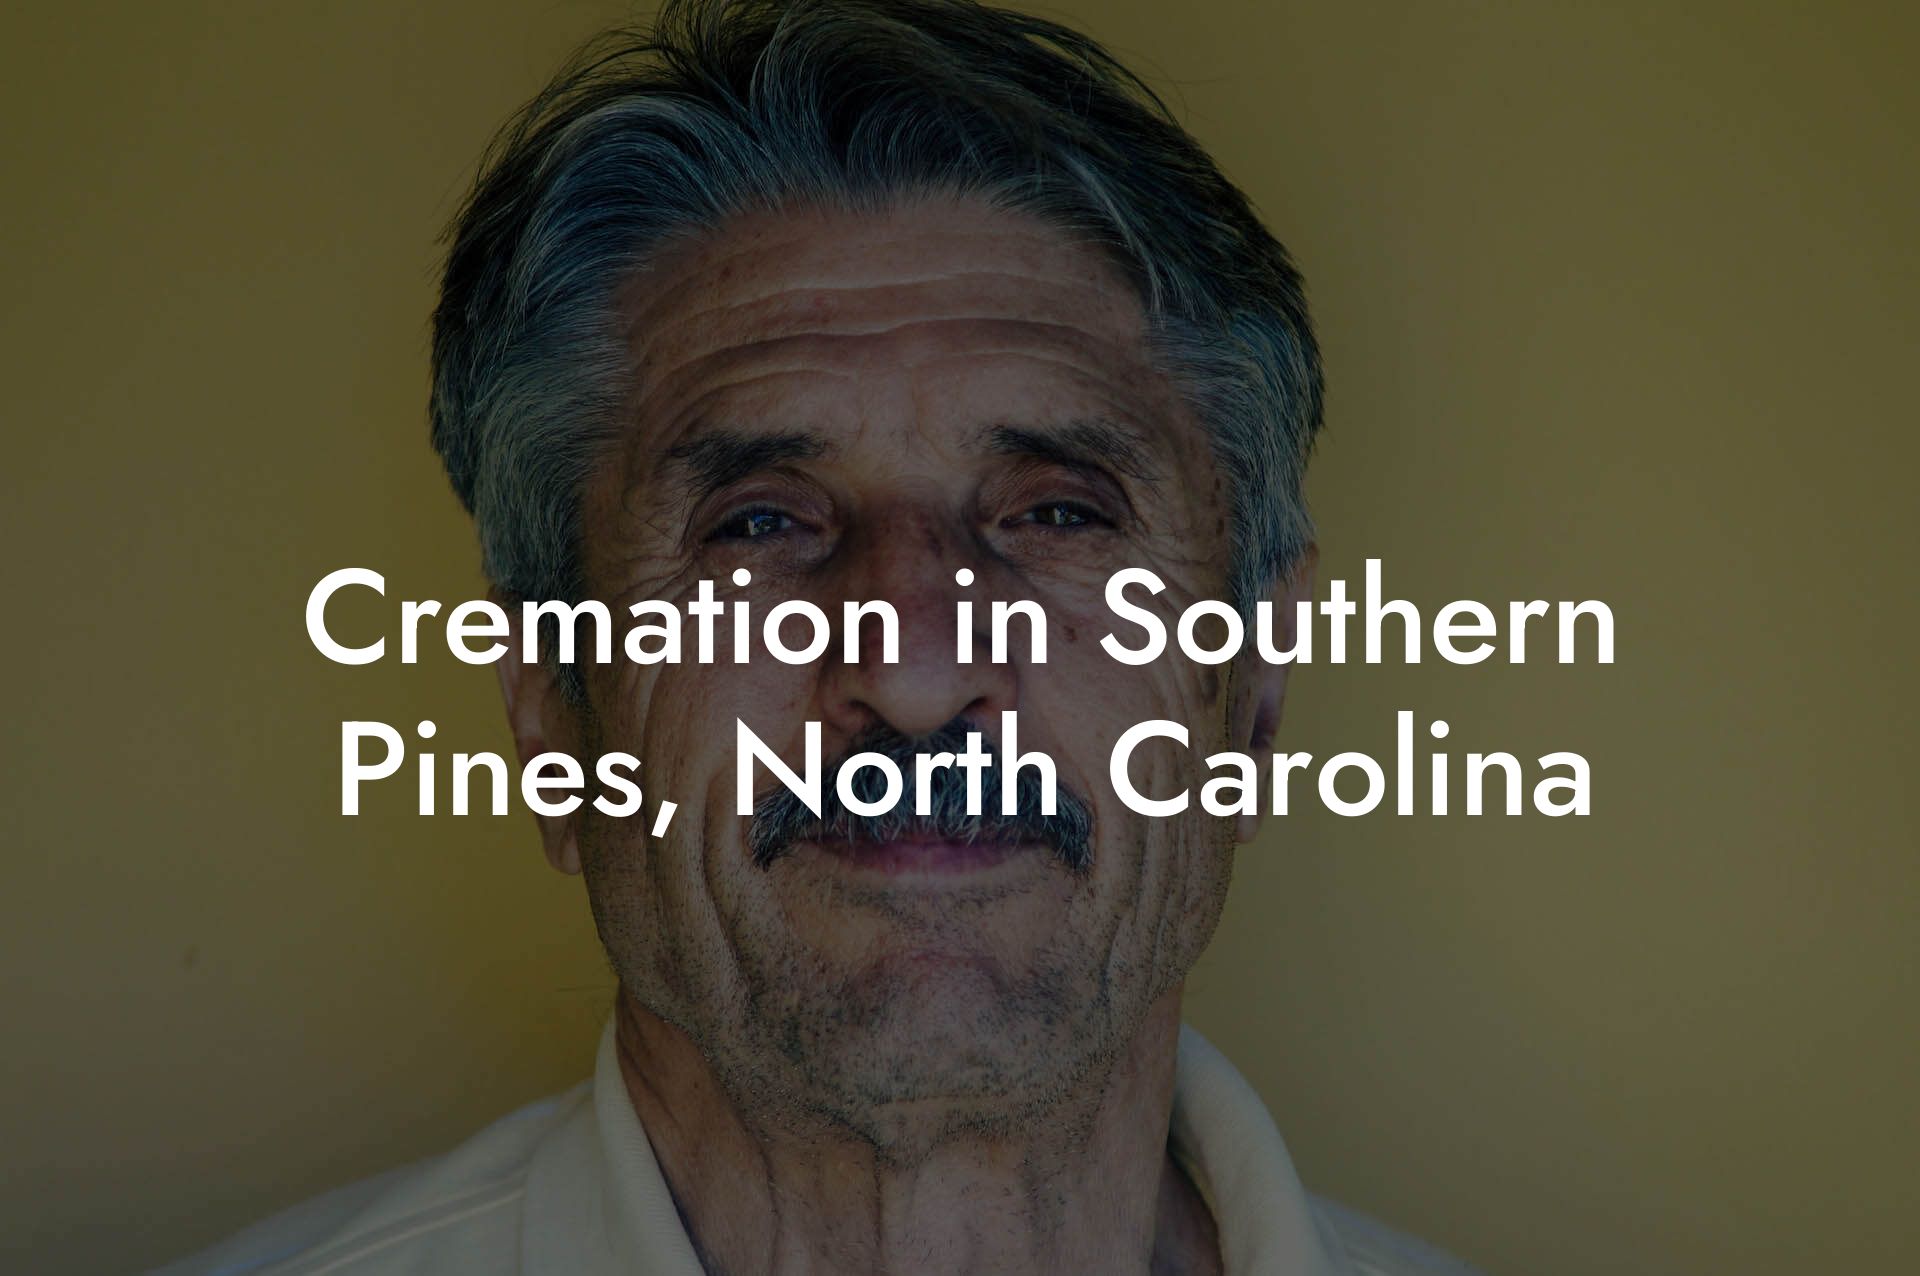 Cremation in Southern Pines, North Carolina